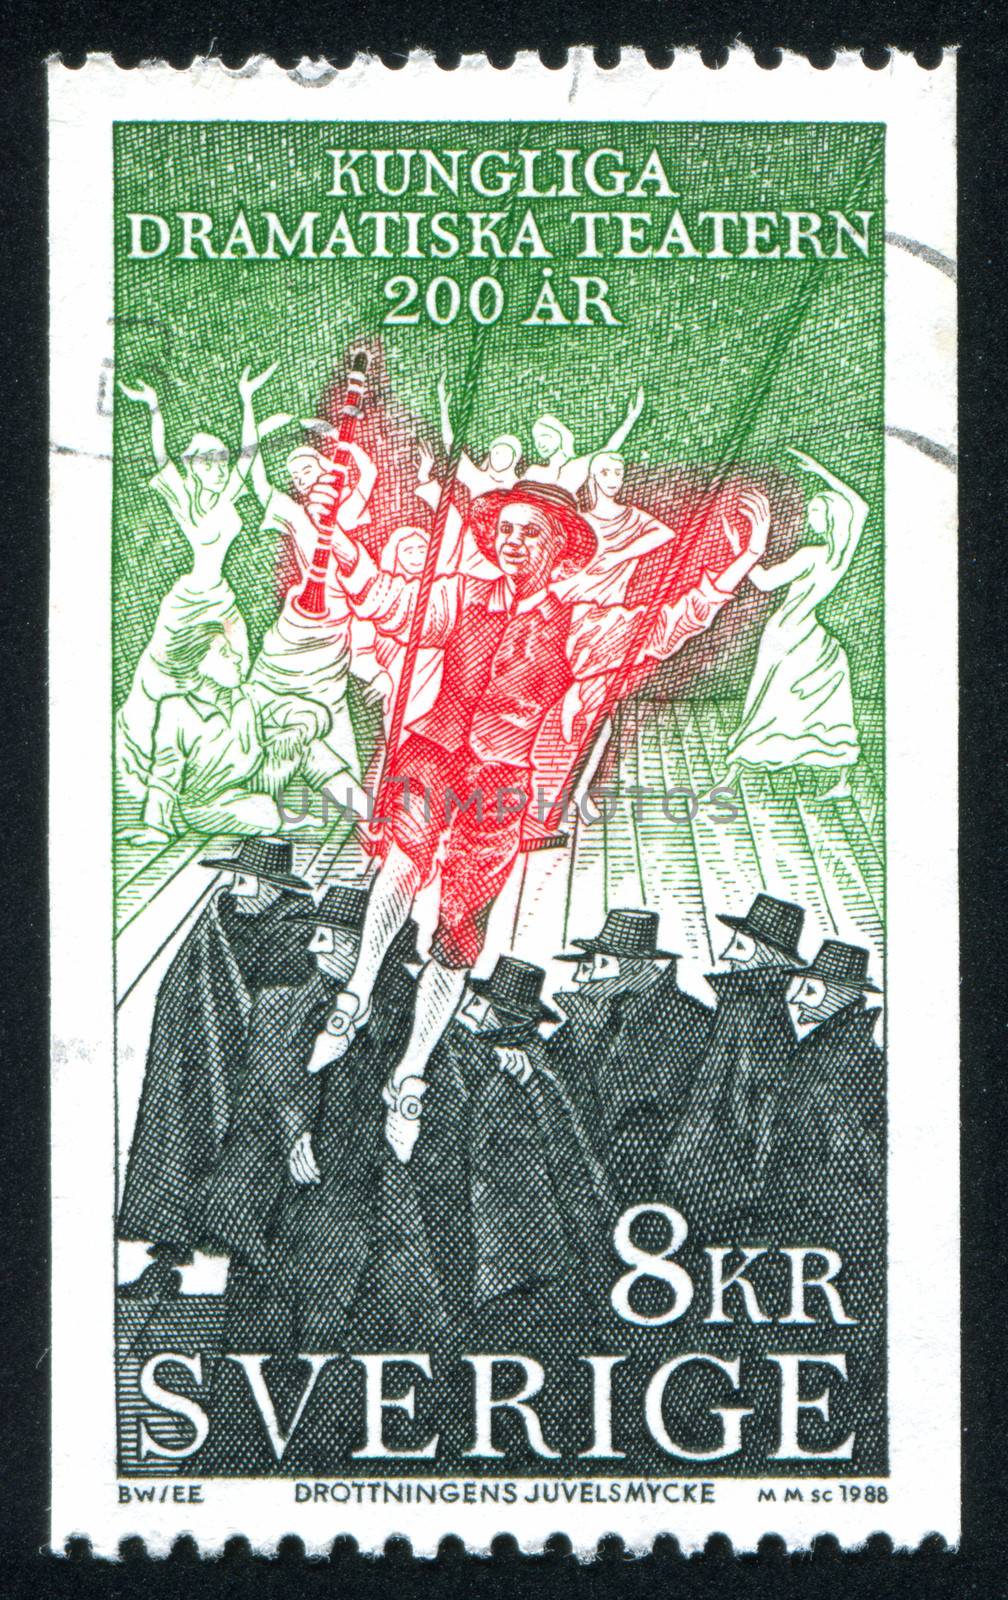 SWEDEN - CIRCA 1988: stamp printed by Sweden, shows Scene from The Queen Diamond Ornament, circa 1988